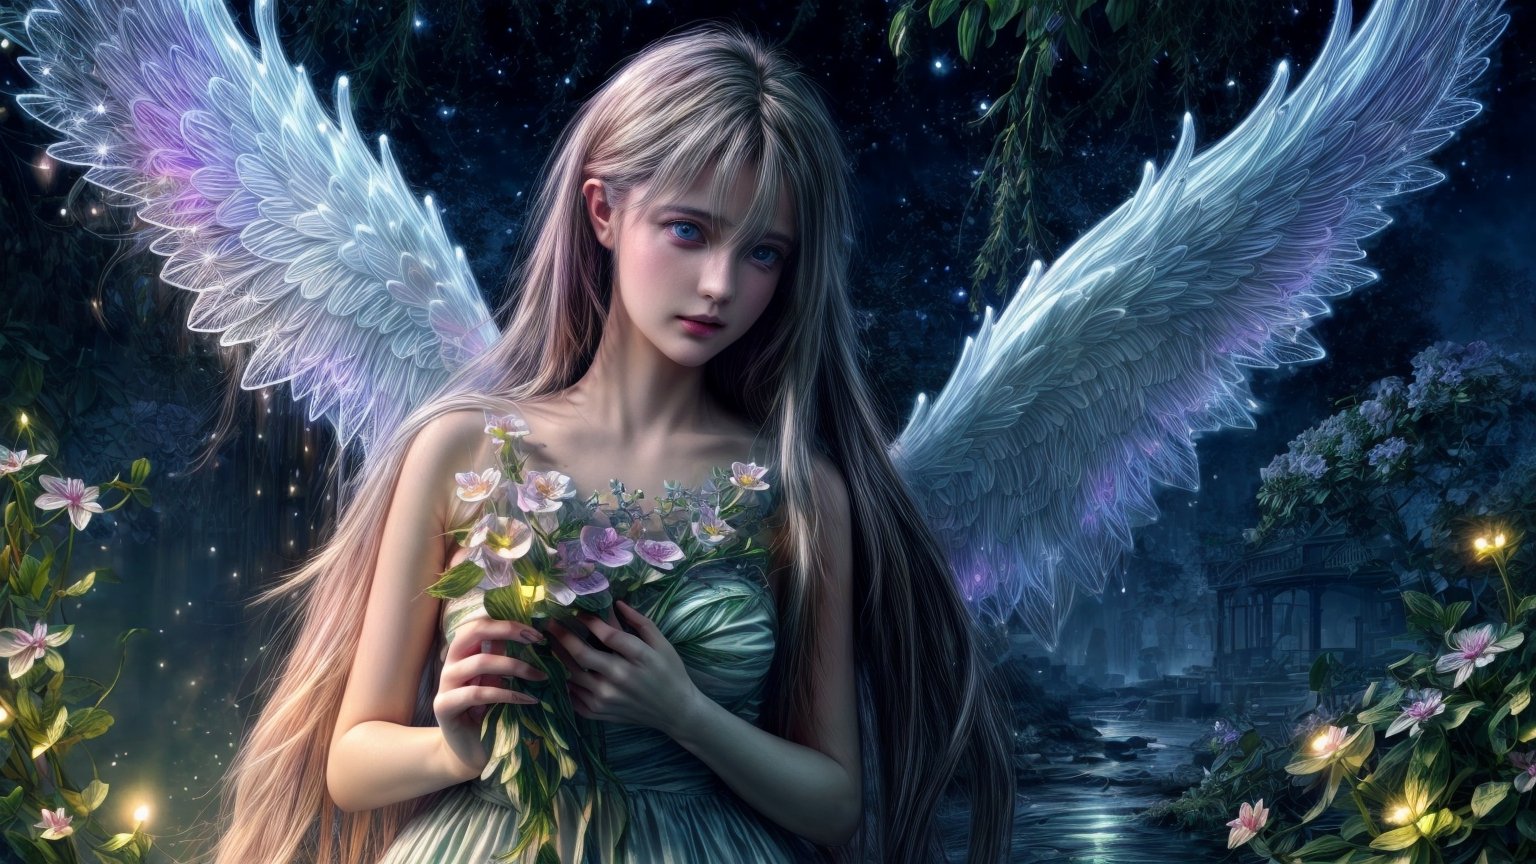 Ultra detailed illustration of an angel lost in a magical world full of wonders, unique luminous flora never seen before, highly detailed, pastel colors,  digital art, art by Mschiffer, night, dark, bioluminescence